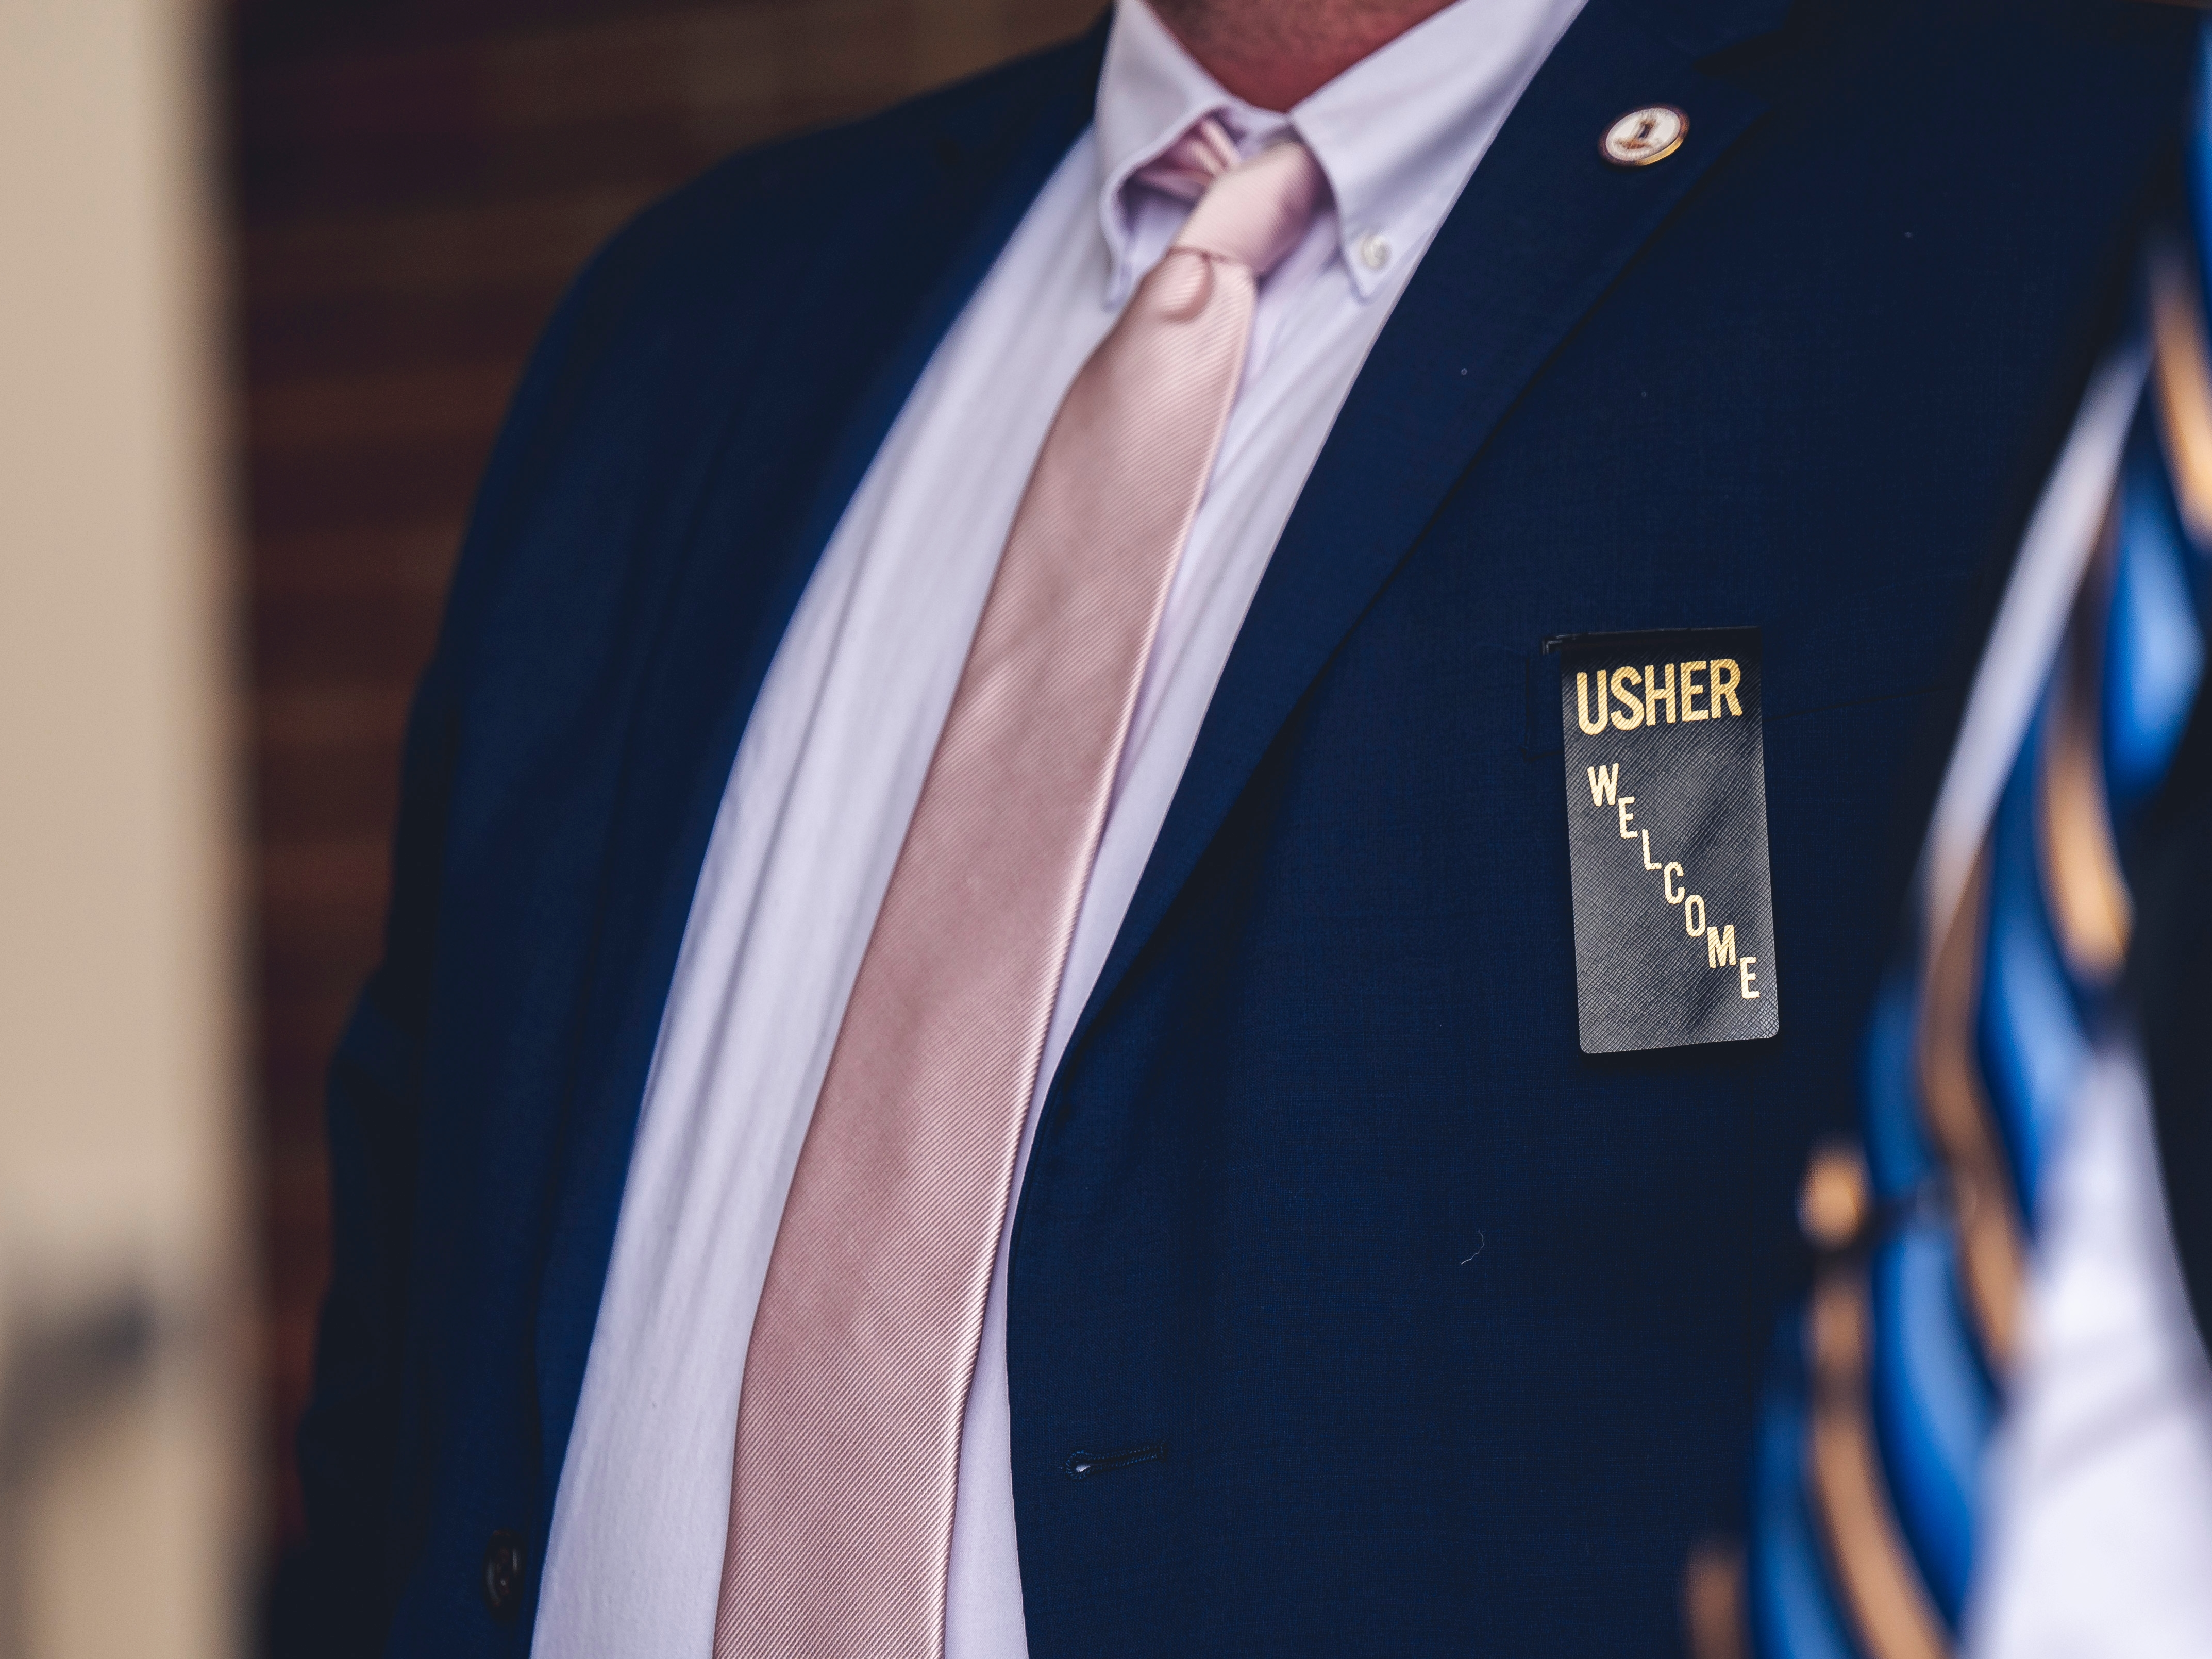 Man in blue suit with usher badge